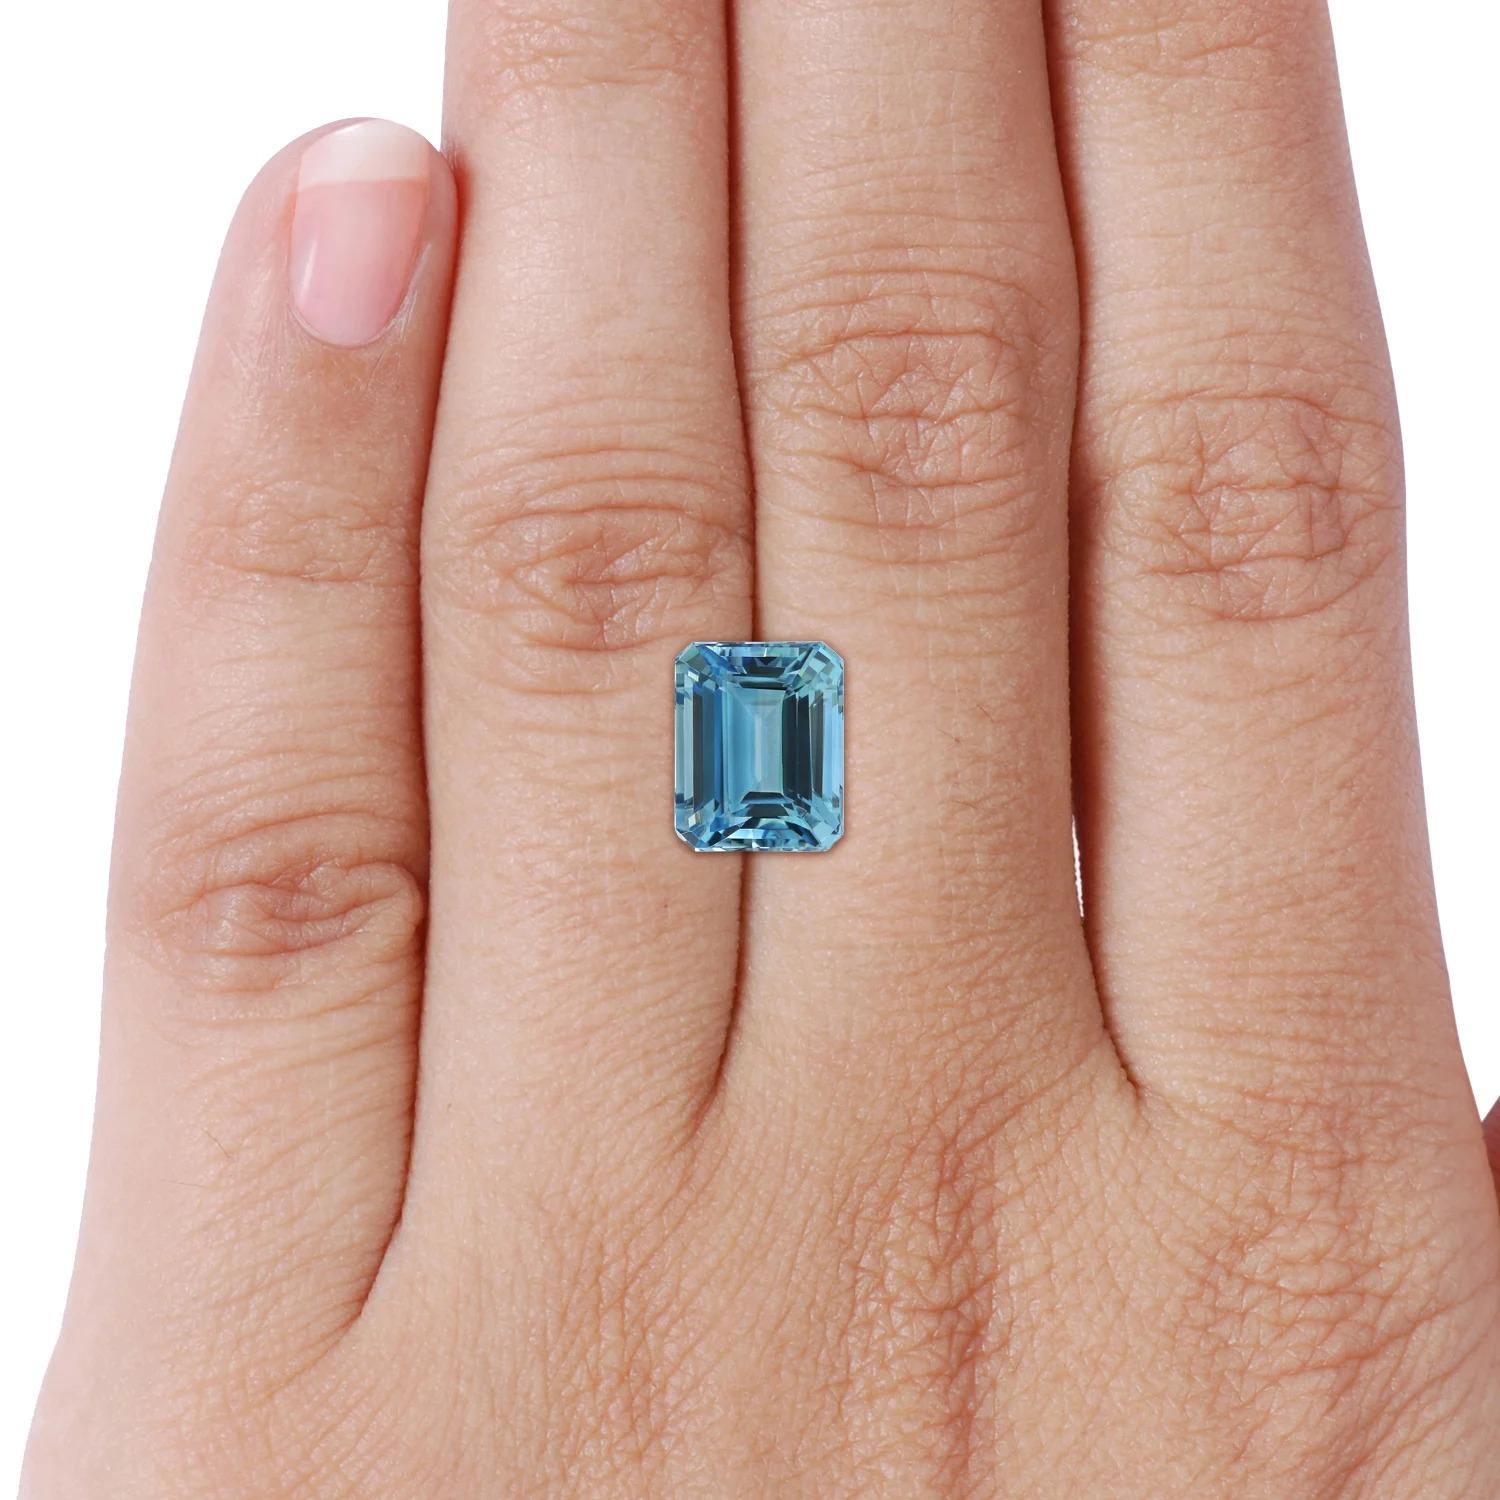 For Sale:  ANGARA GIA Certified Solitaire Emerald-Cut Aquamarine Ring in White Gold 7